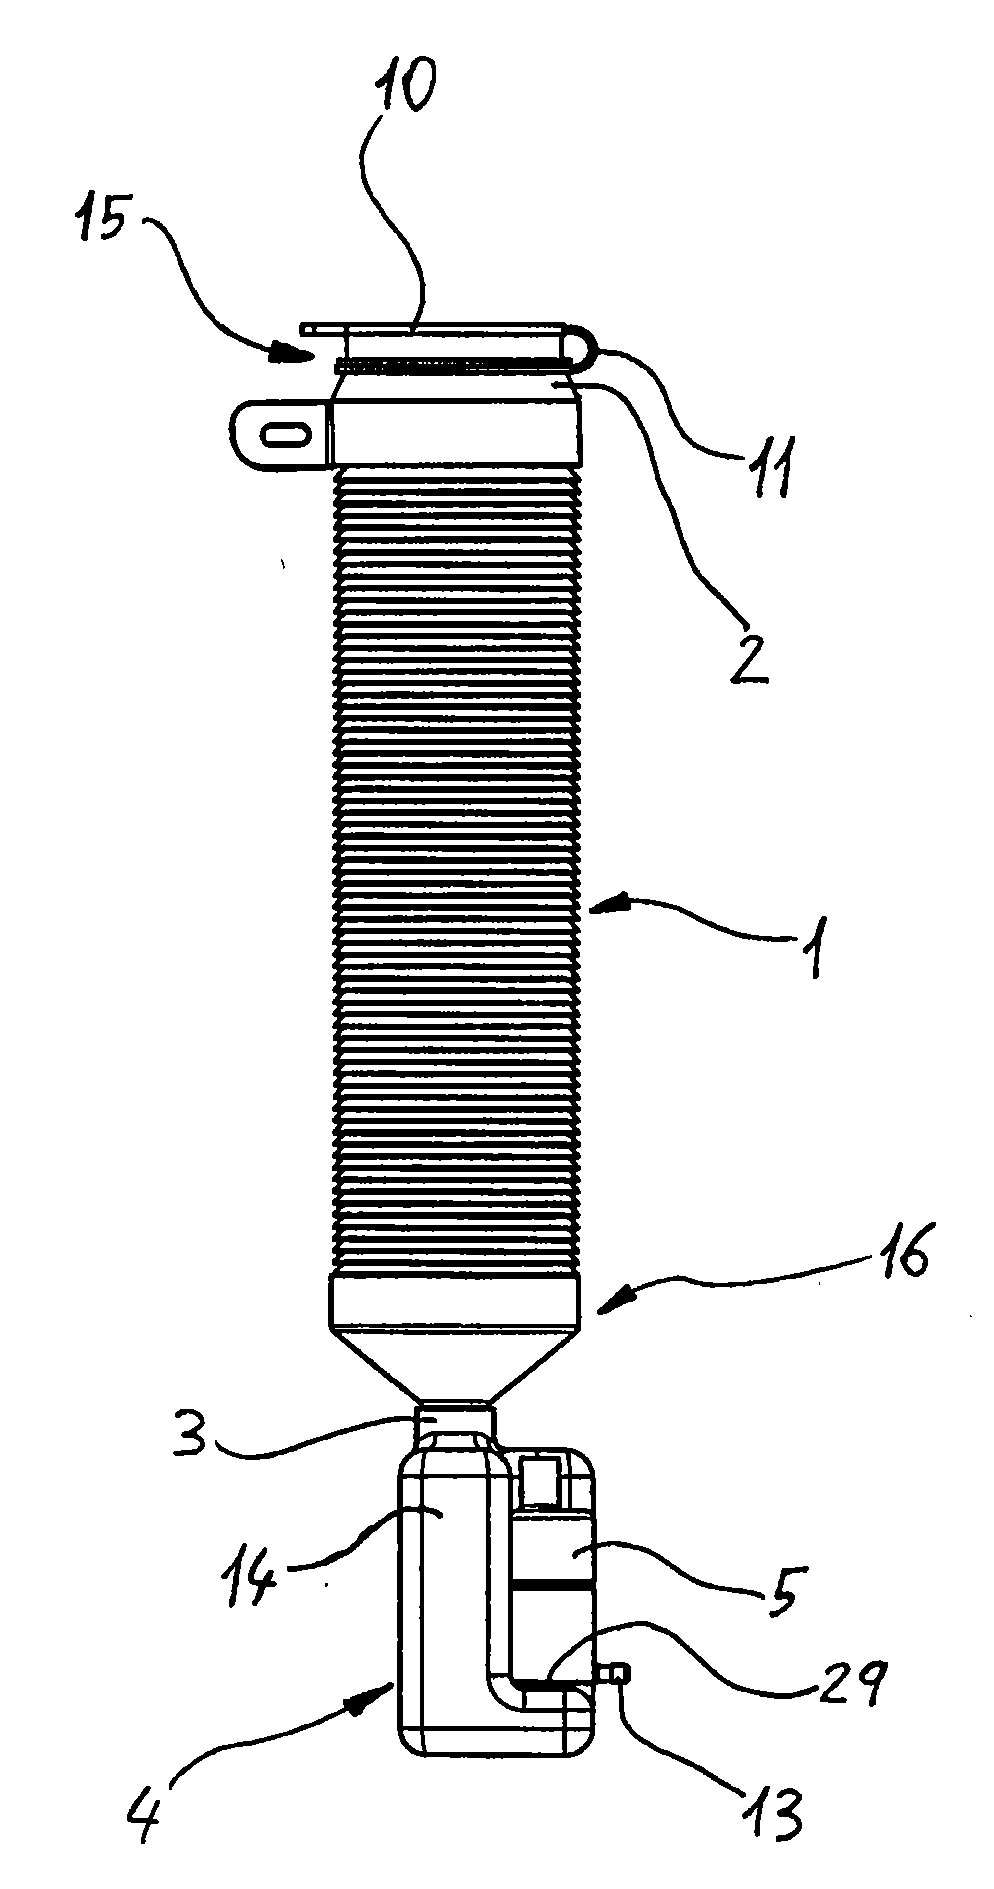 Container assembly for windshield and headlight washing fluid in a vehicle